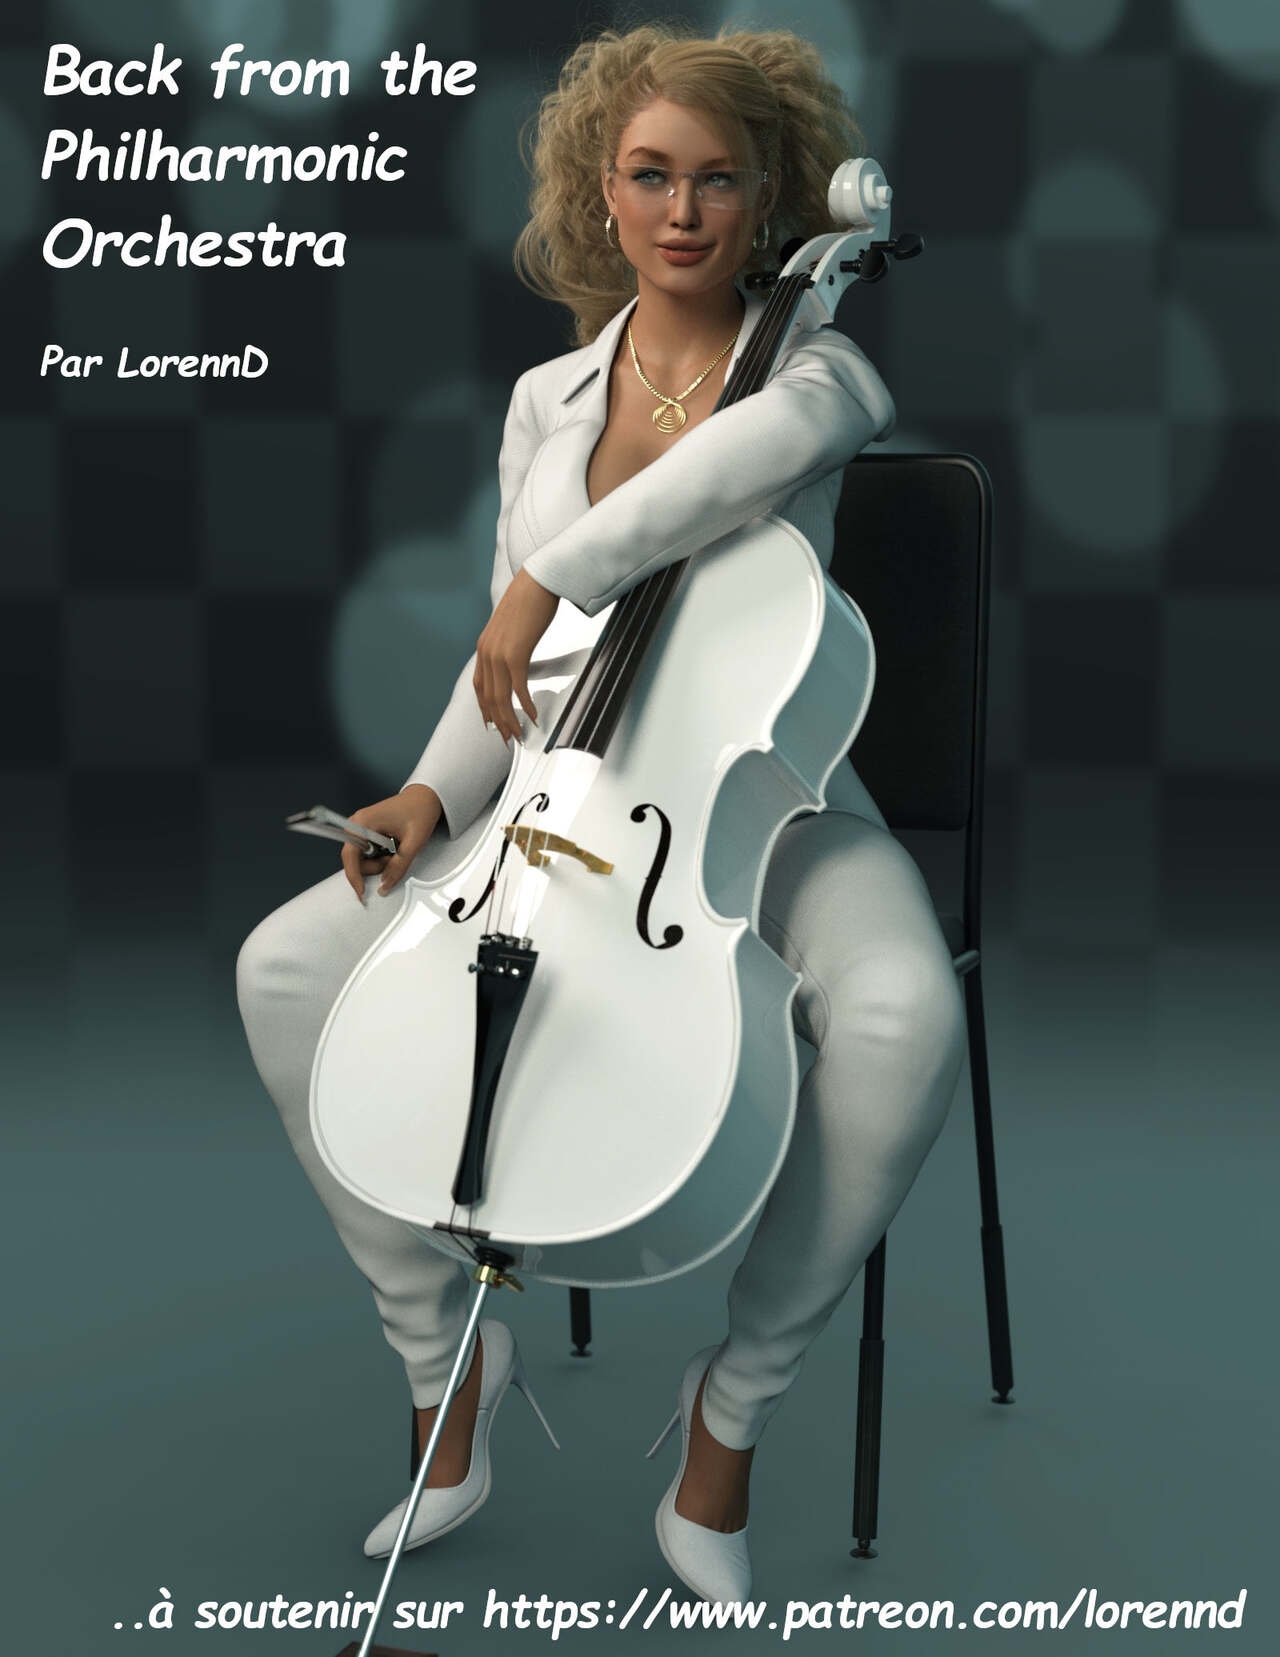 [LorennD] Back from the Philharmonic Orchestra [French] 0